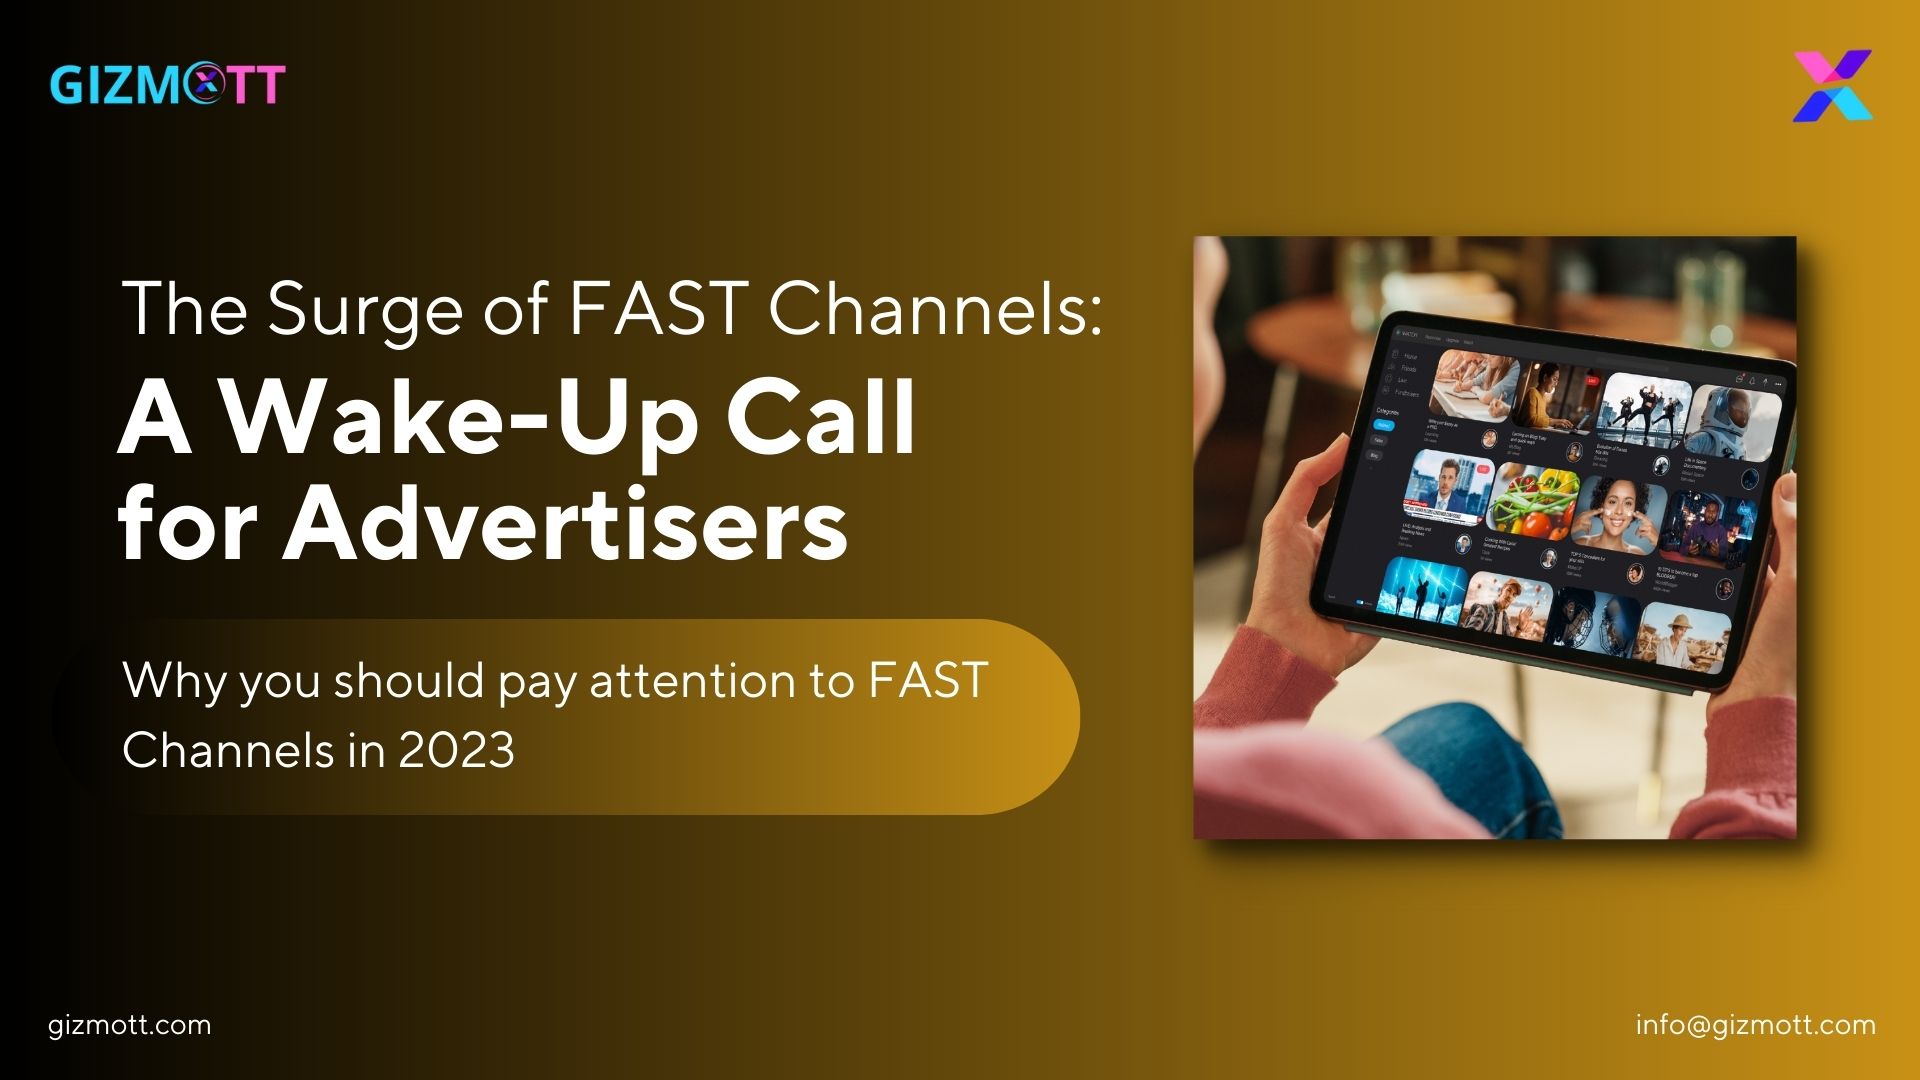 The Surge of FAST Channels: A Wake-Up Call for Advertisers